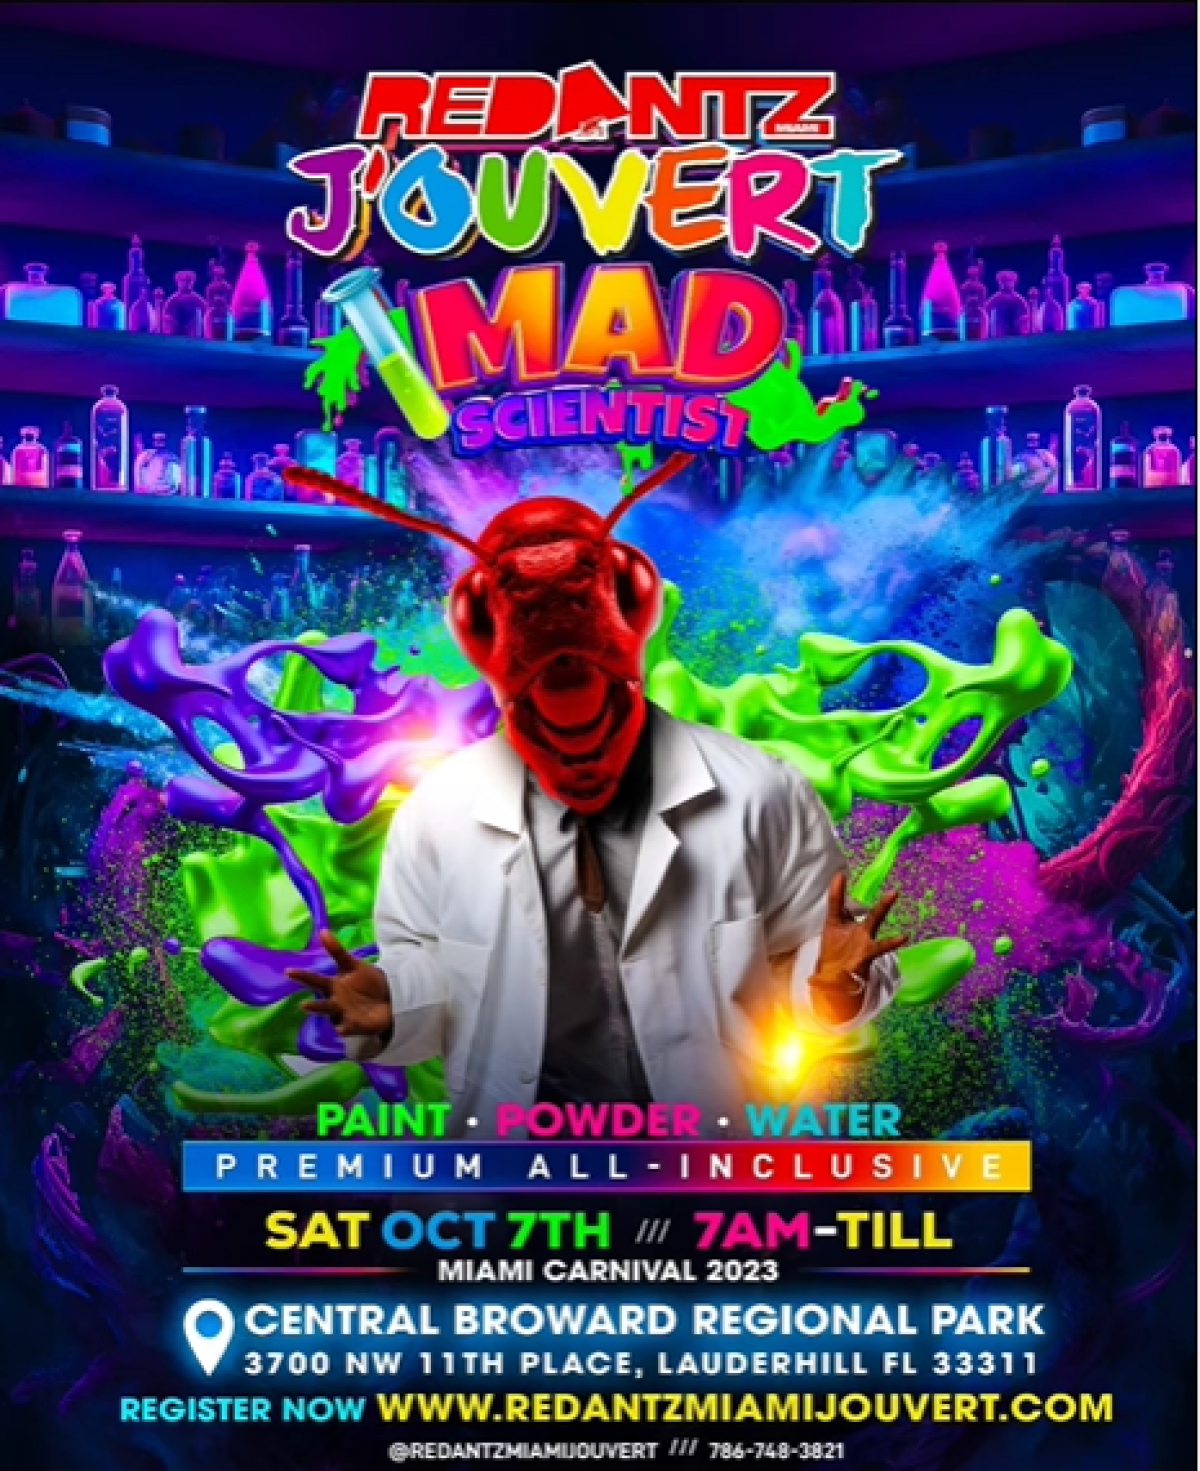 Red Antz Jouvert Mad Scienist  flyer or graphic.